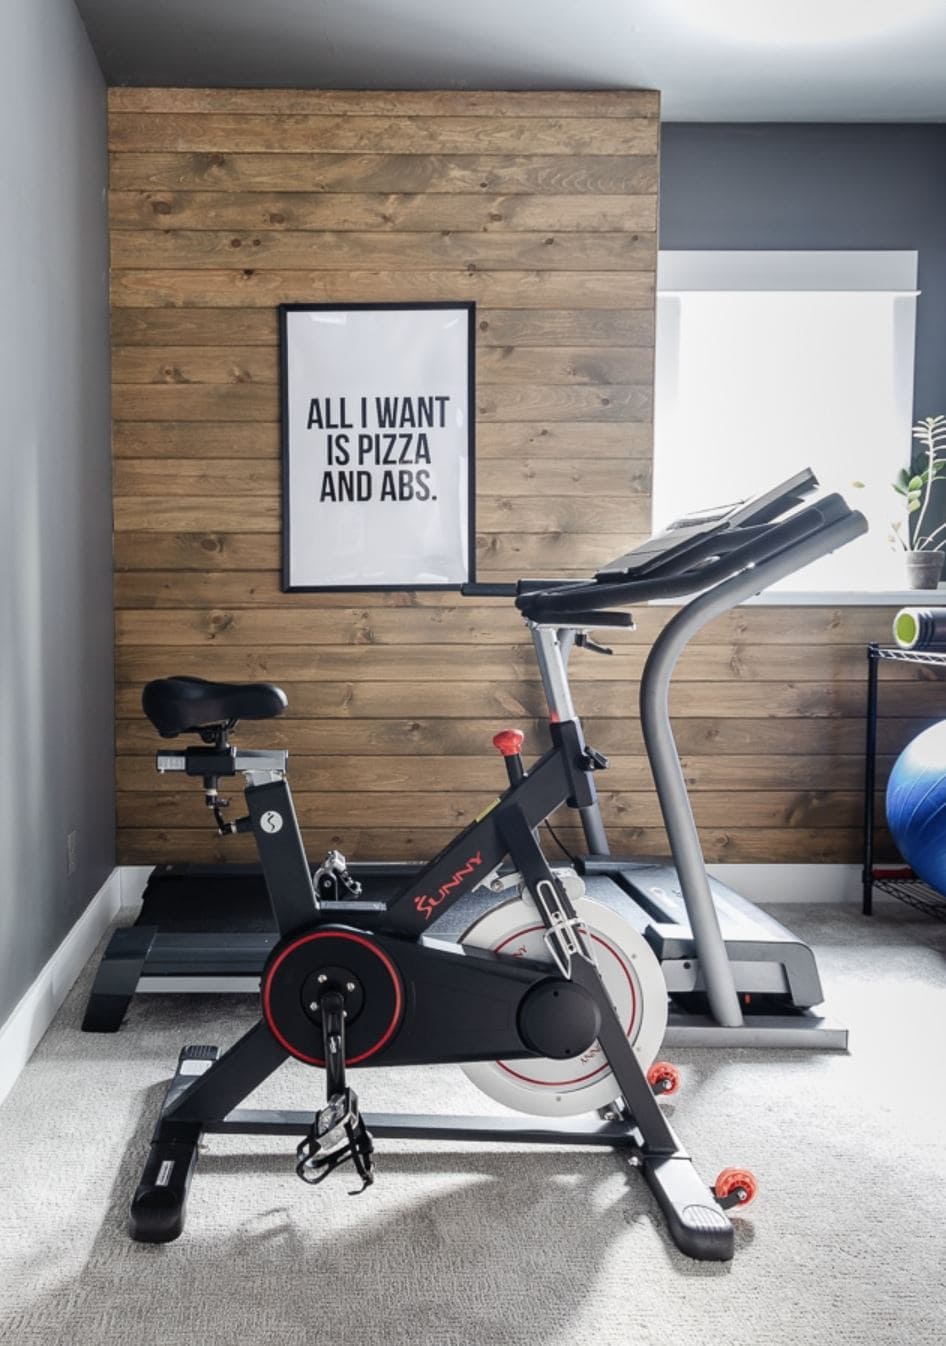 A workout area with a rustic wood planked wall.